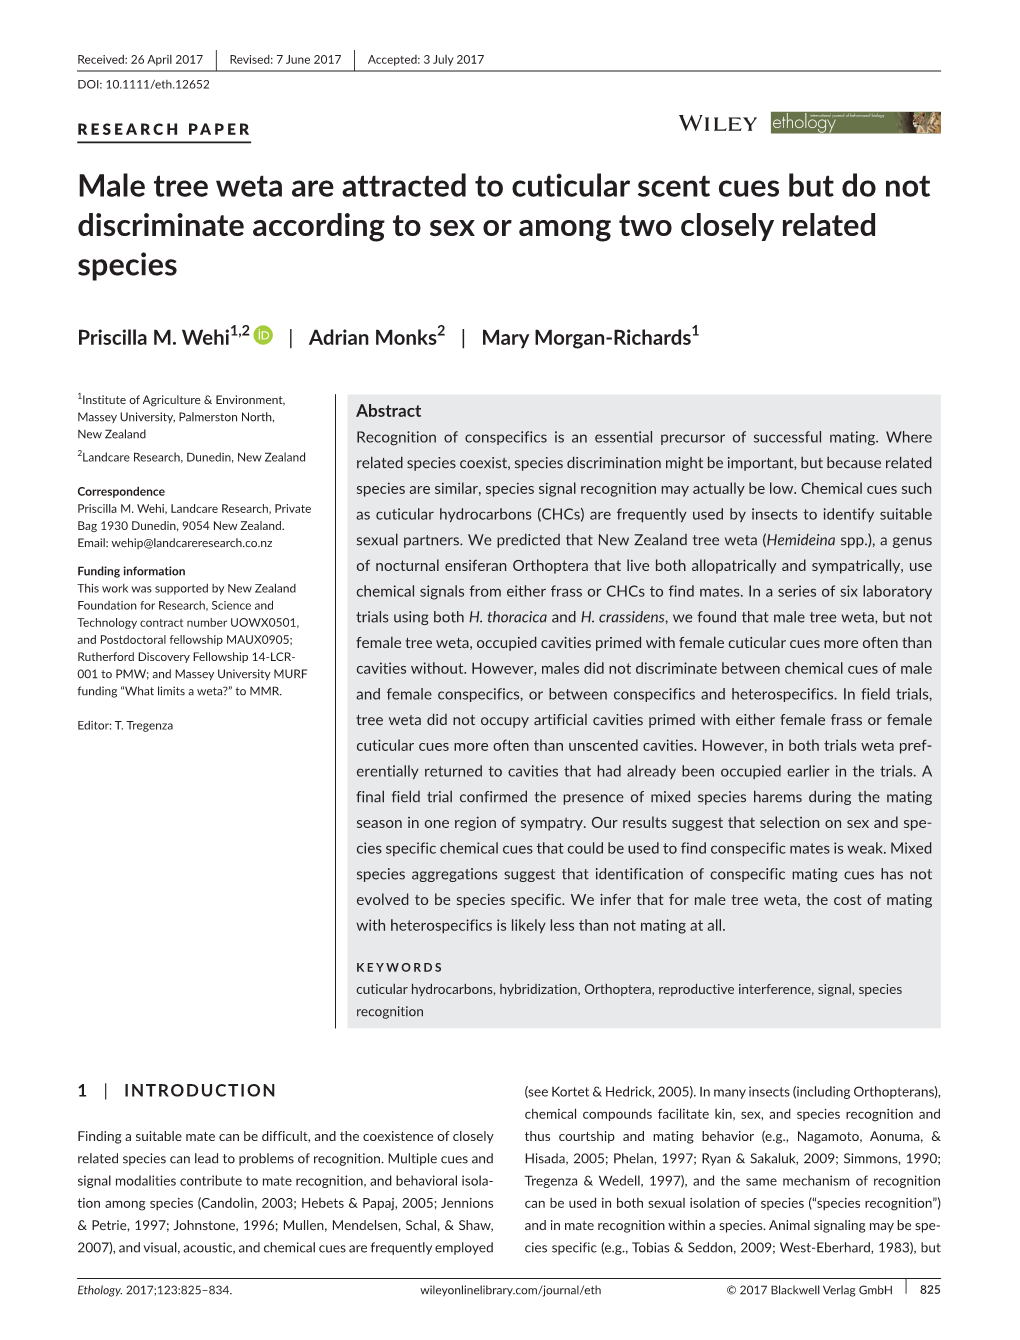 Male Tree Weta Are Attracted to Cuticular Scent Cues but Do Not Discriminate According to Sex Or Among Two Closely Related Species